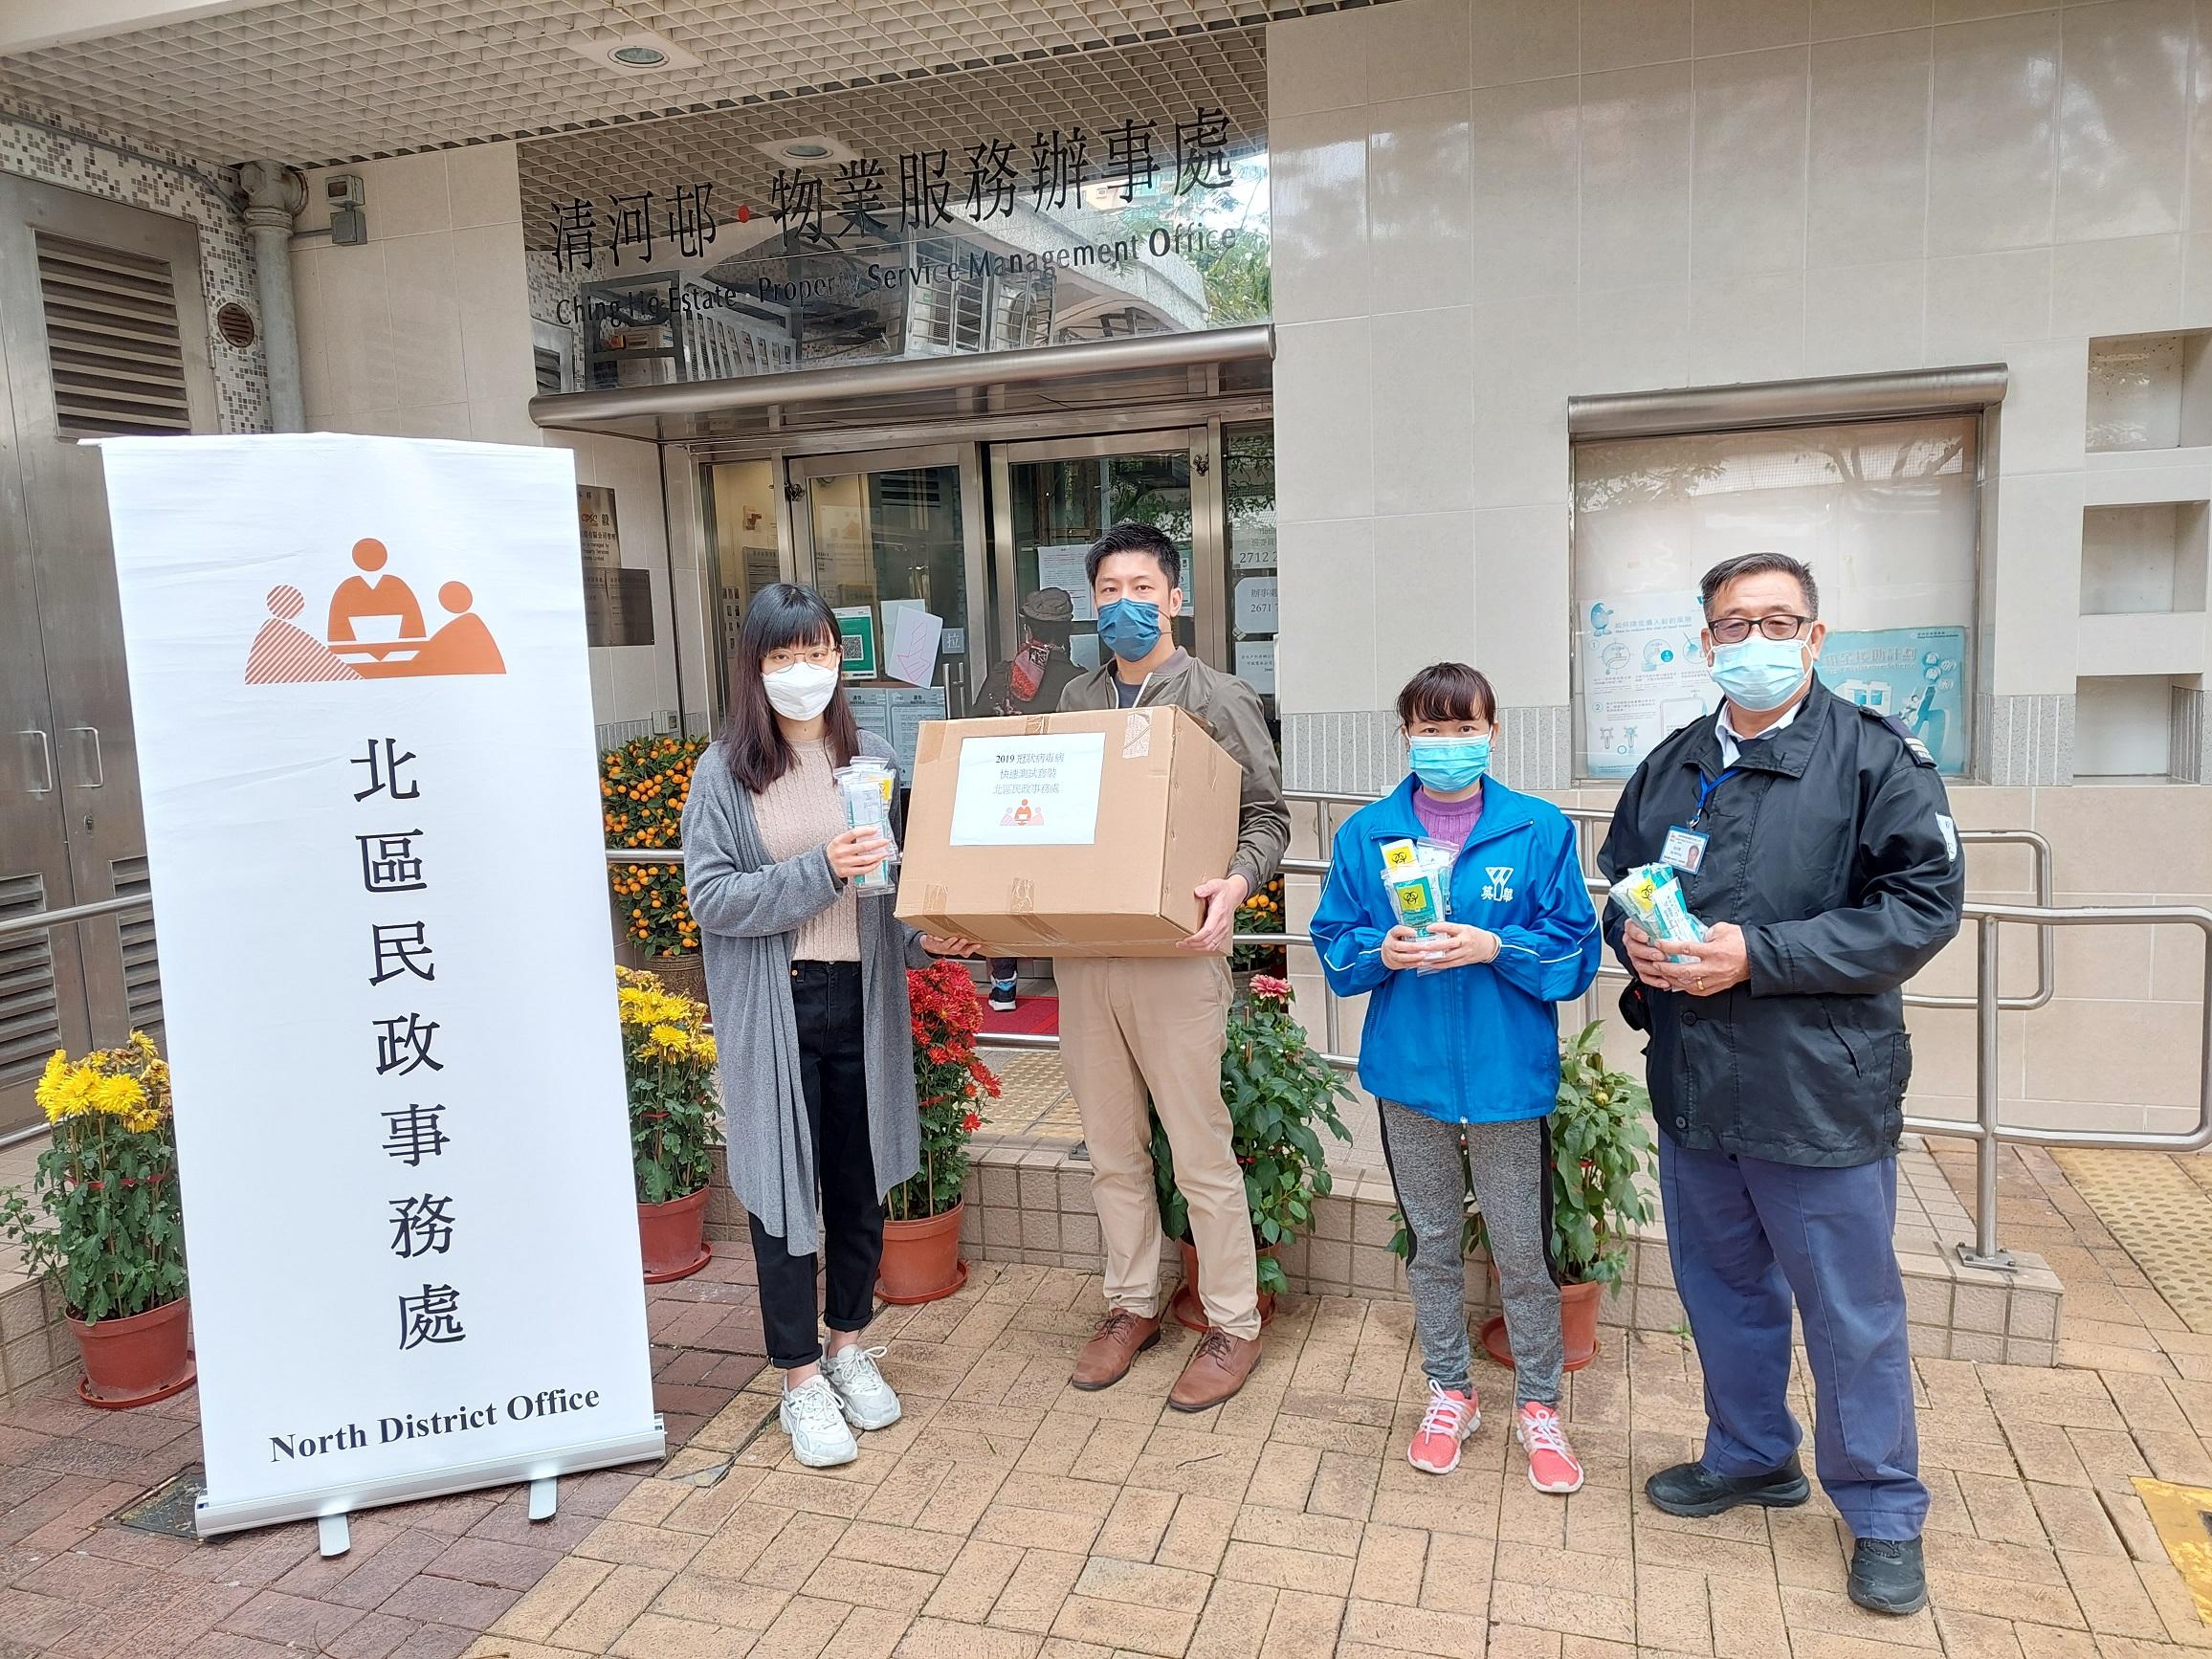 The North District Office today (February 15) distributed COVID-19 rapid test kits to cleansing workers and property management staff working in Ching Ho Estate for voluntary testing through the property service management office of the Estate. 

